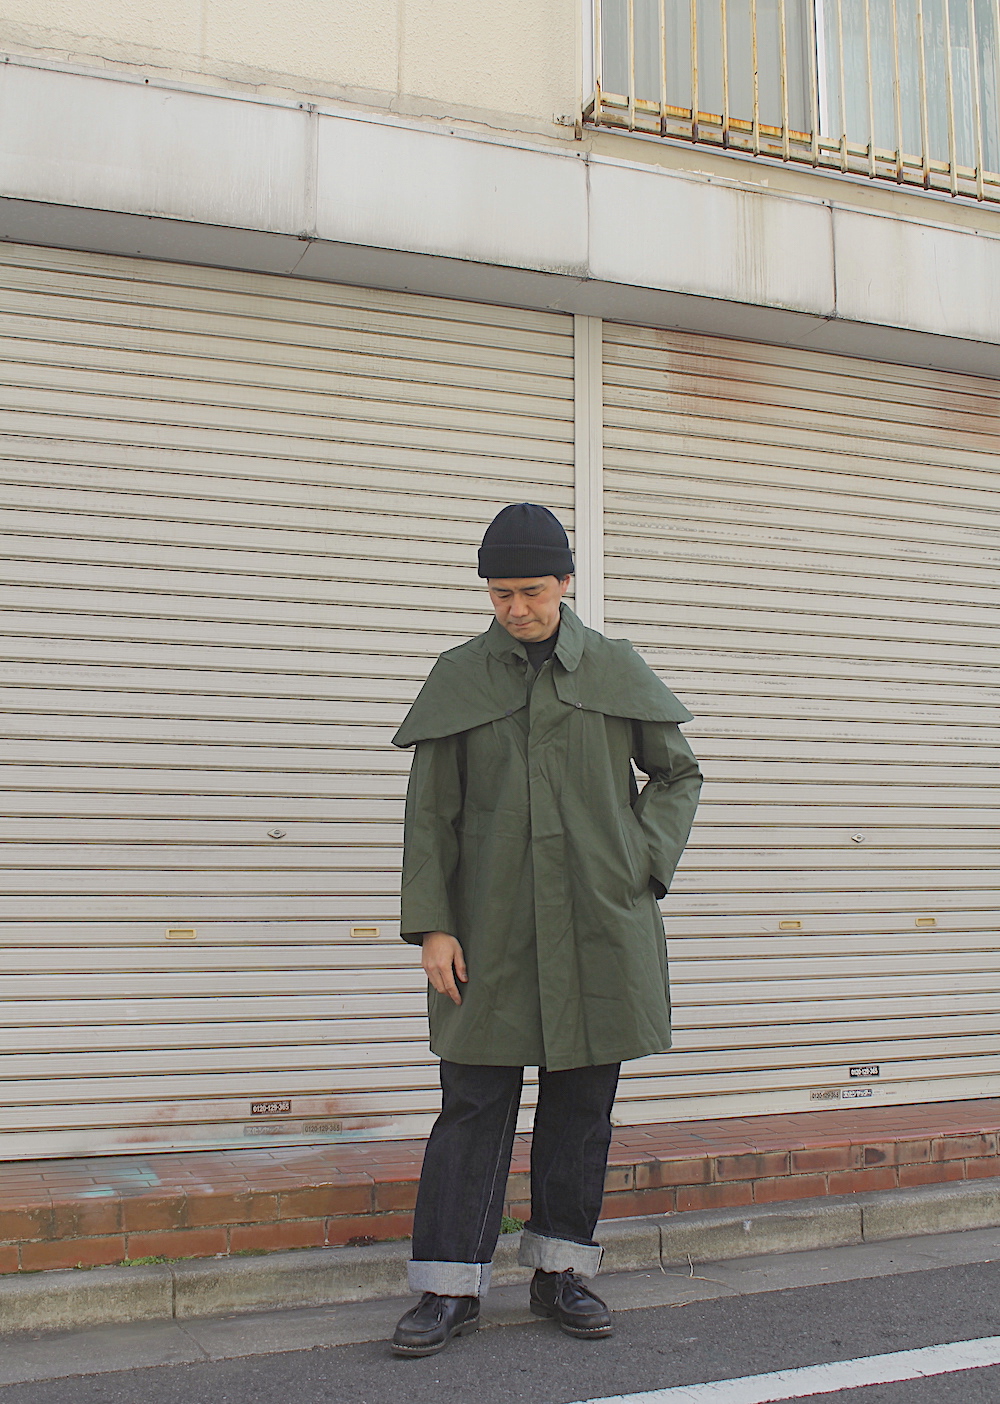 French military dead stock cape coat